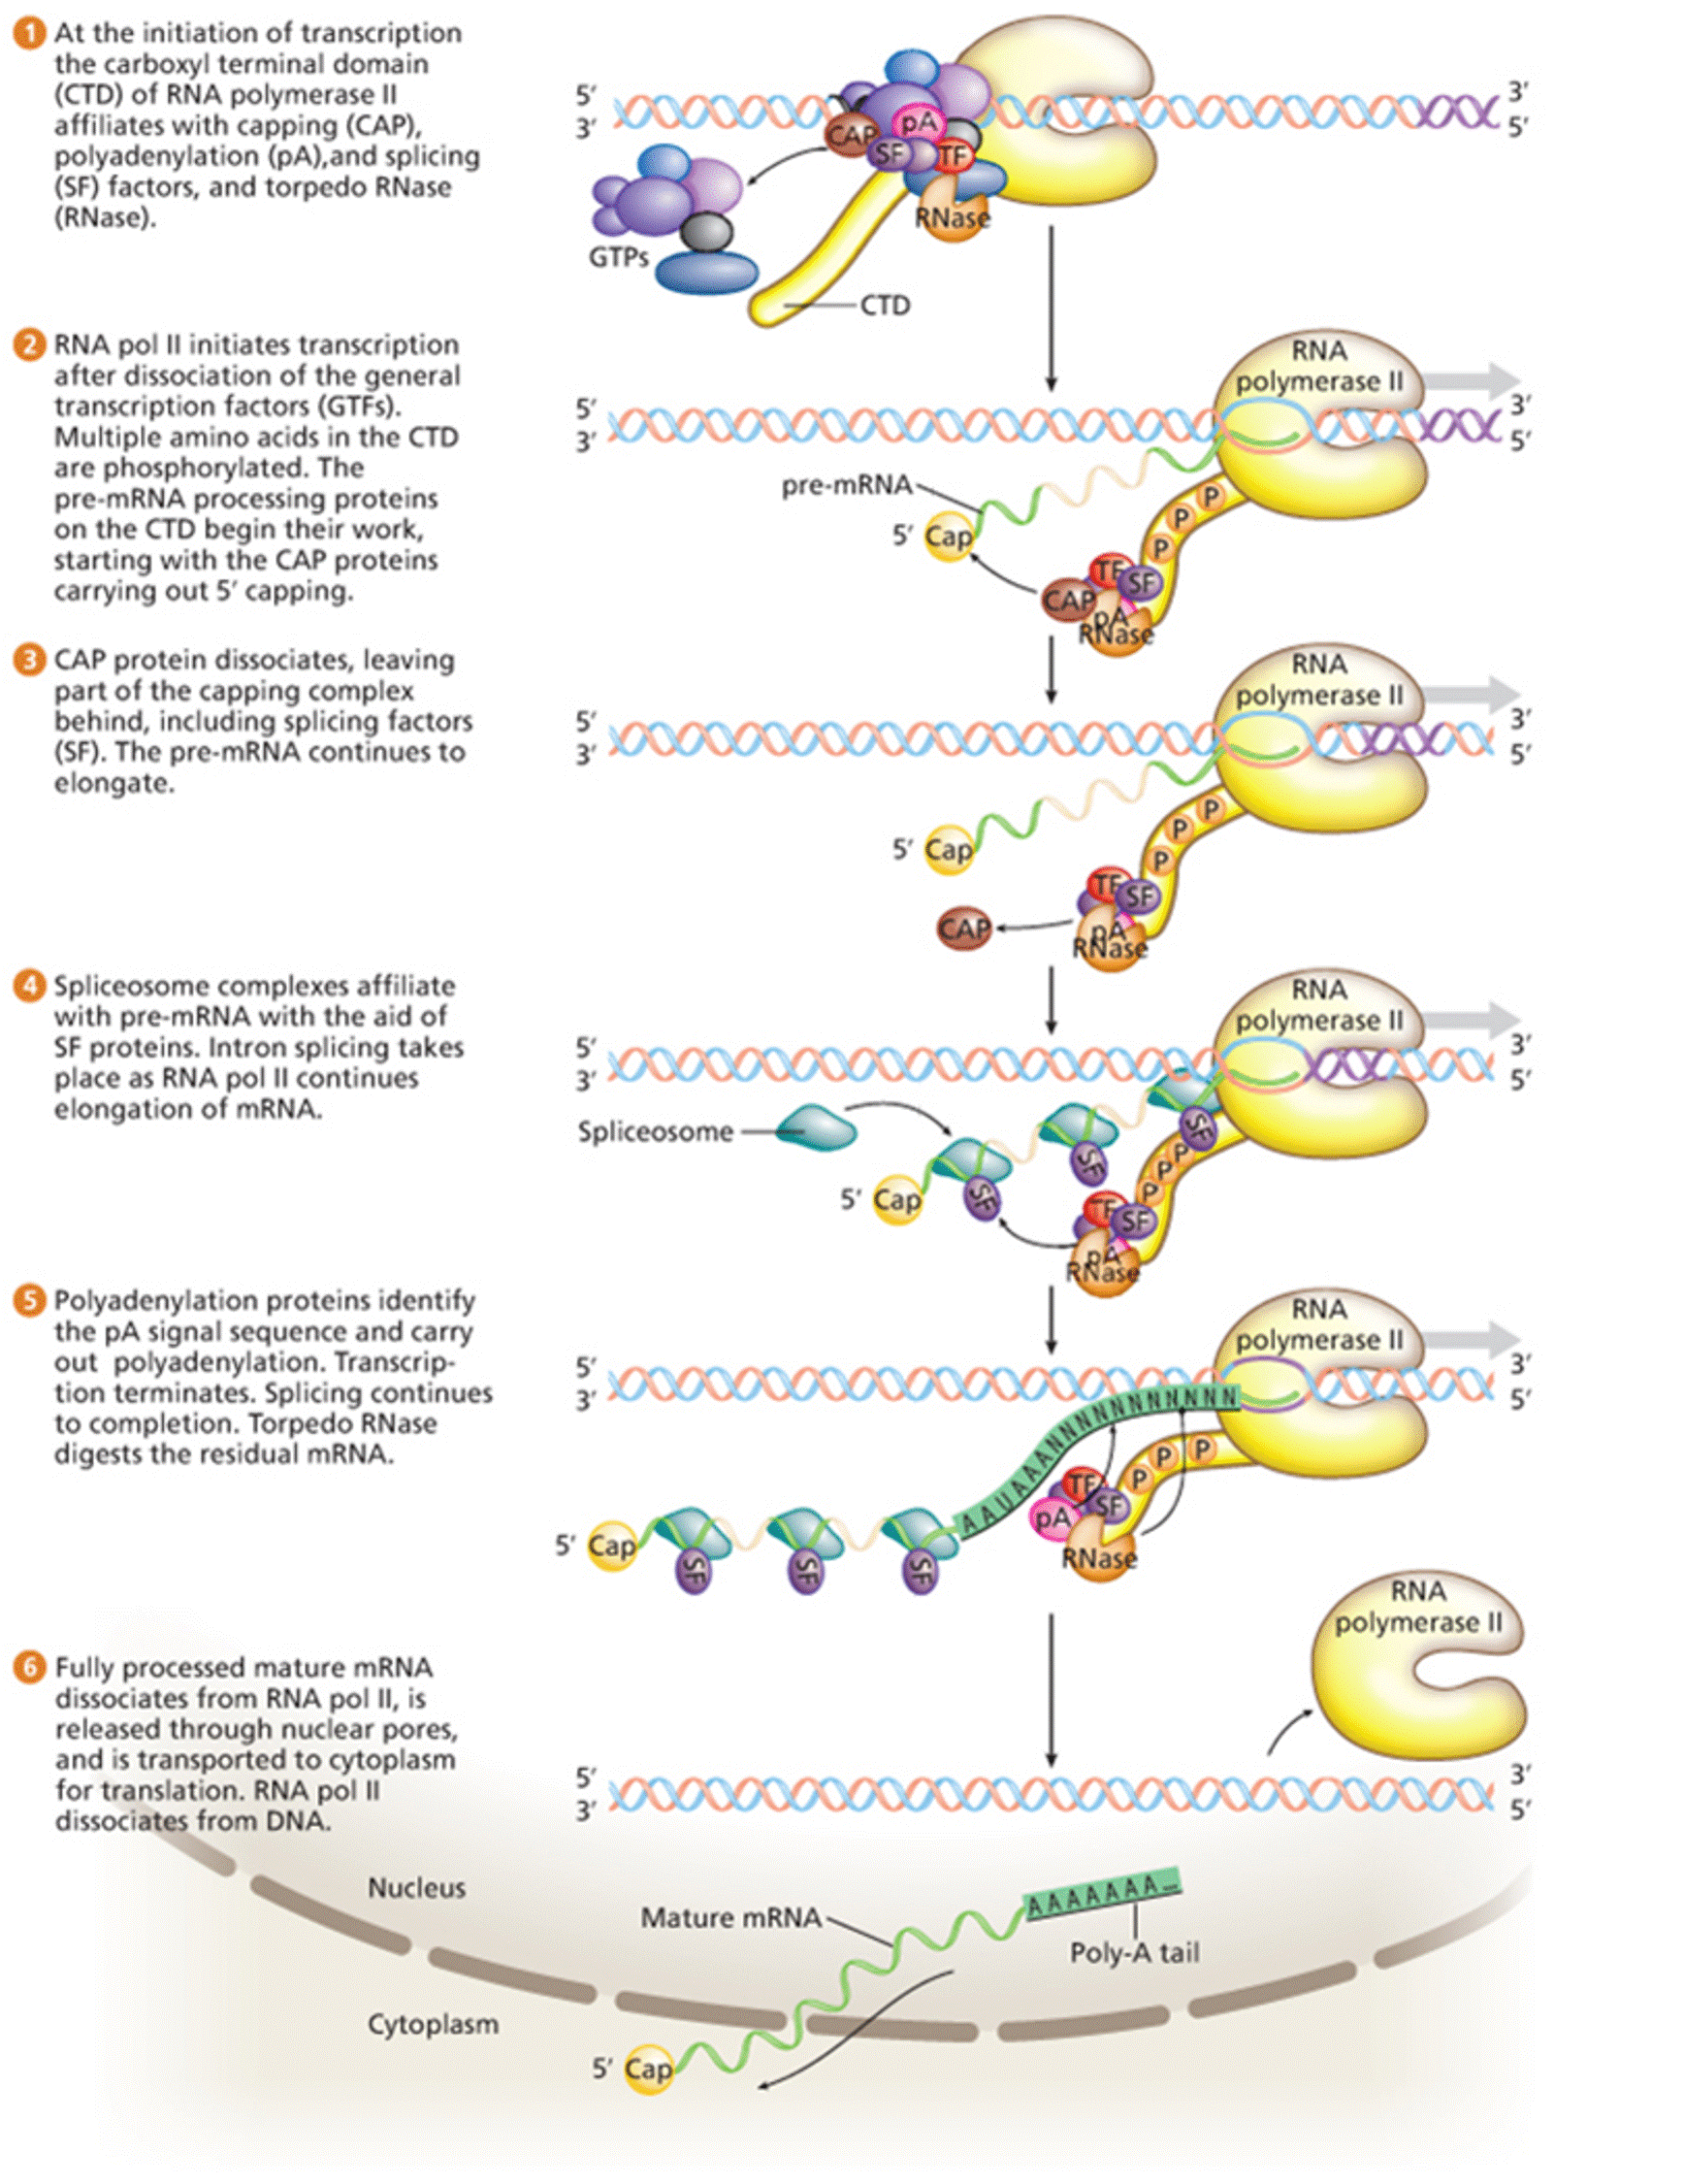 The Gene Expression Machine Model for Coupling